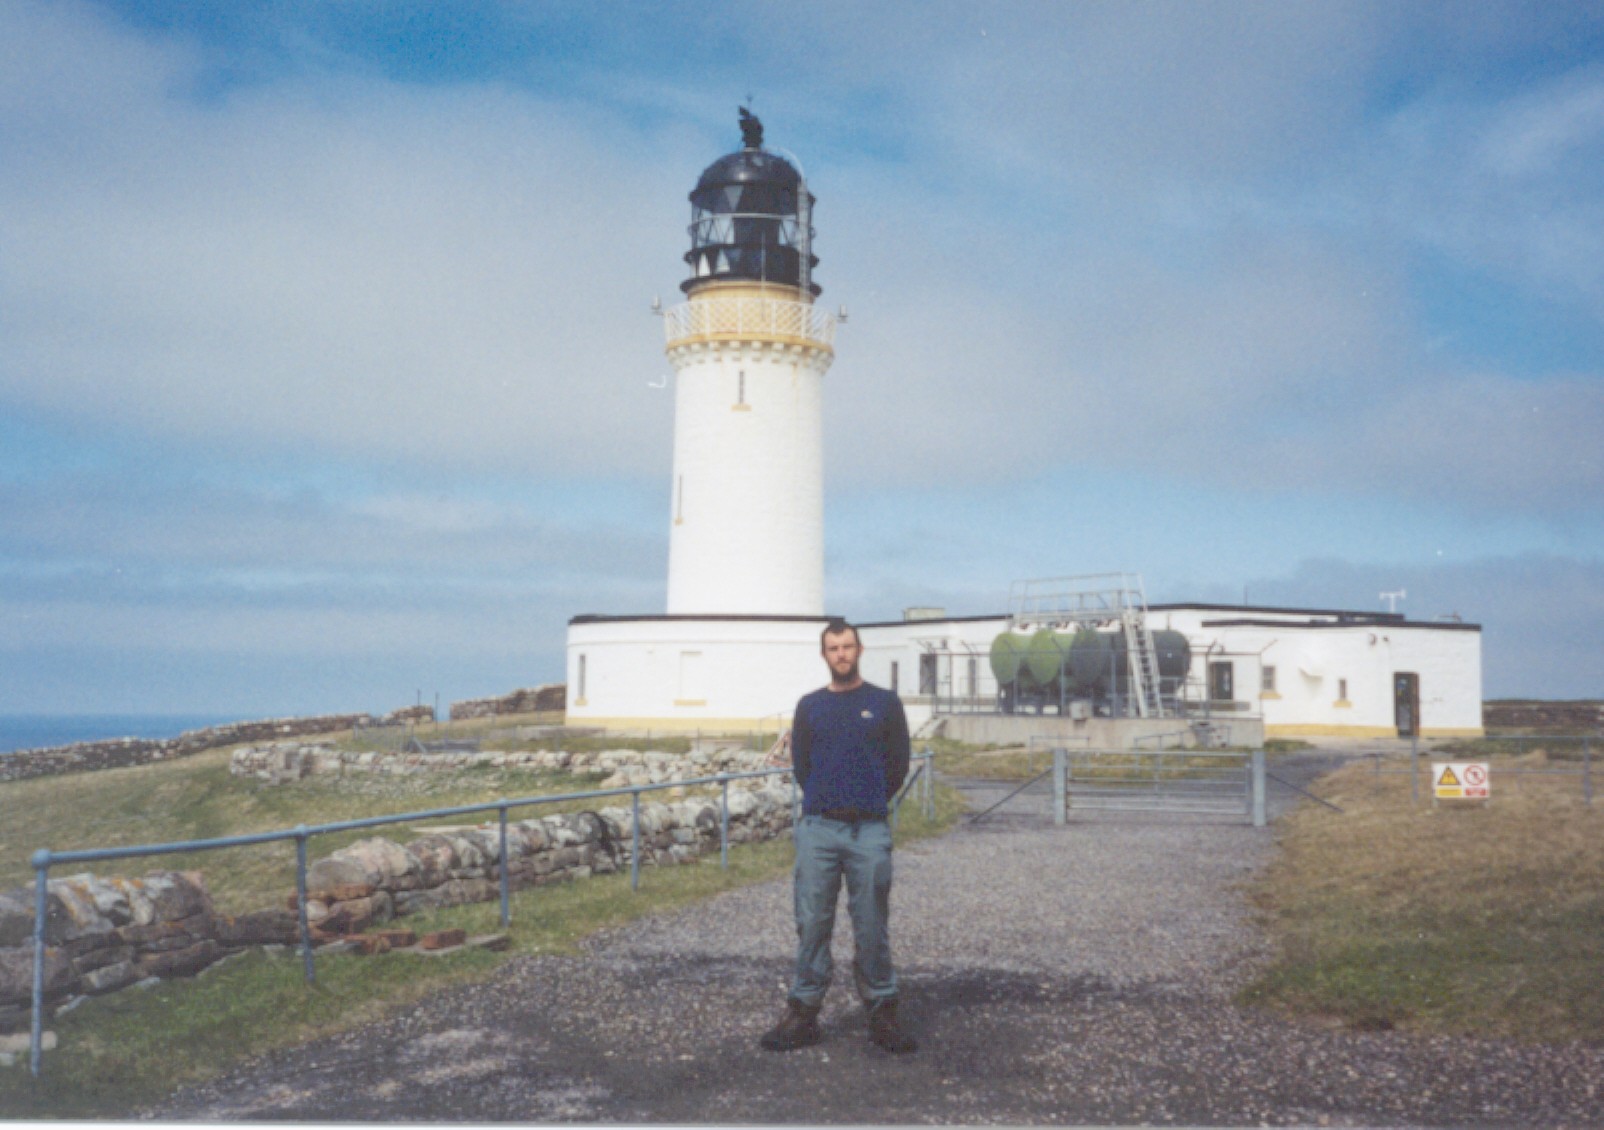 Myself standing in front of the lighthouse.